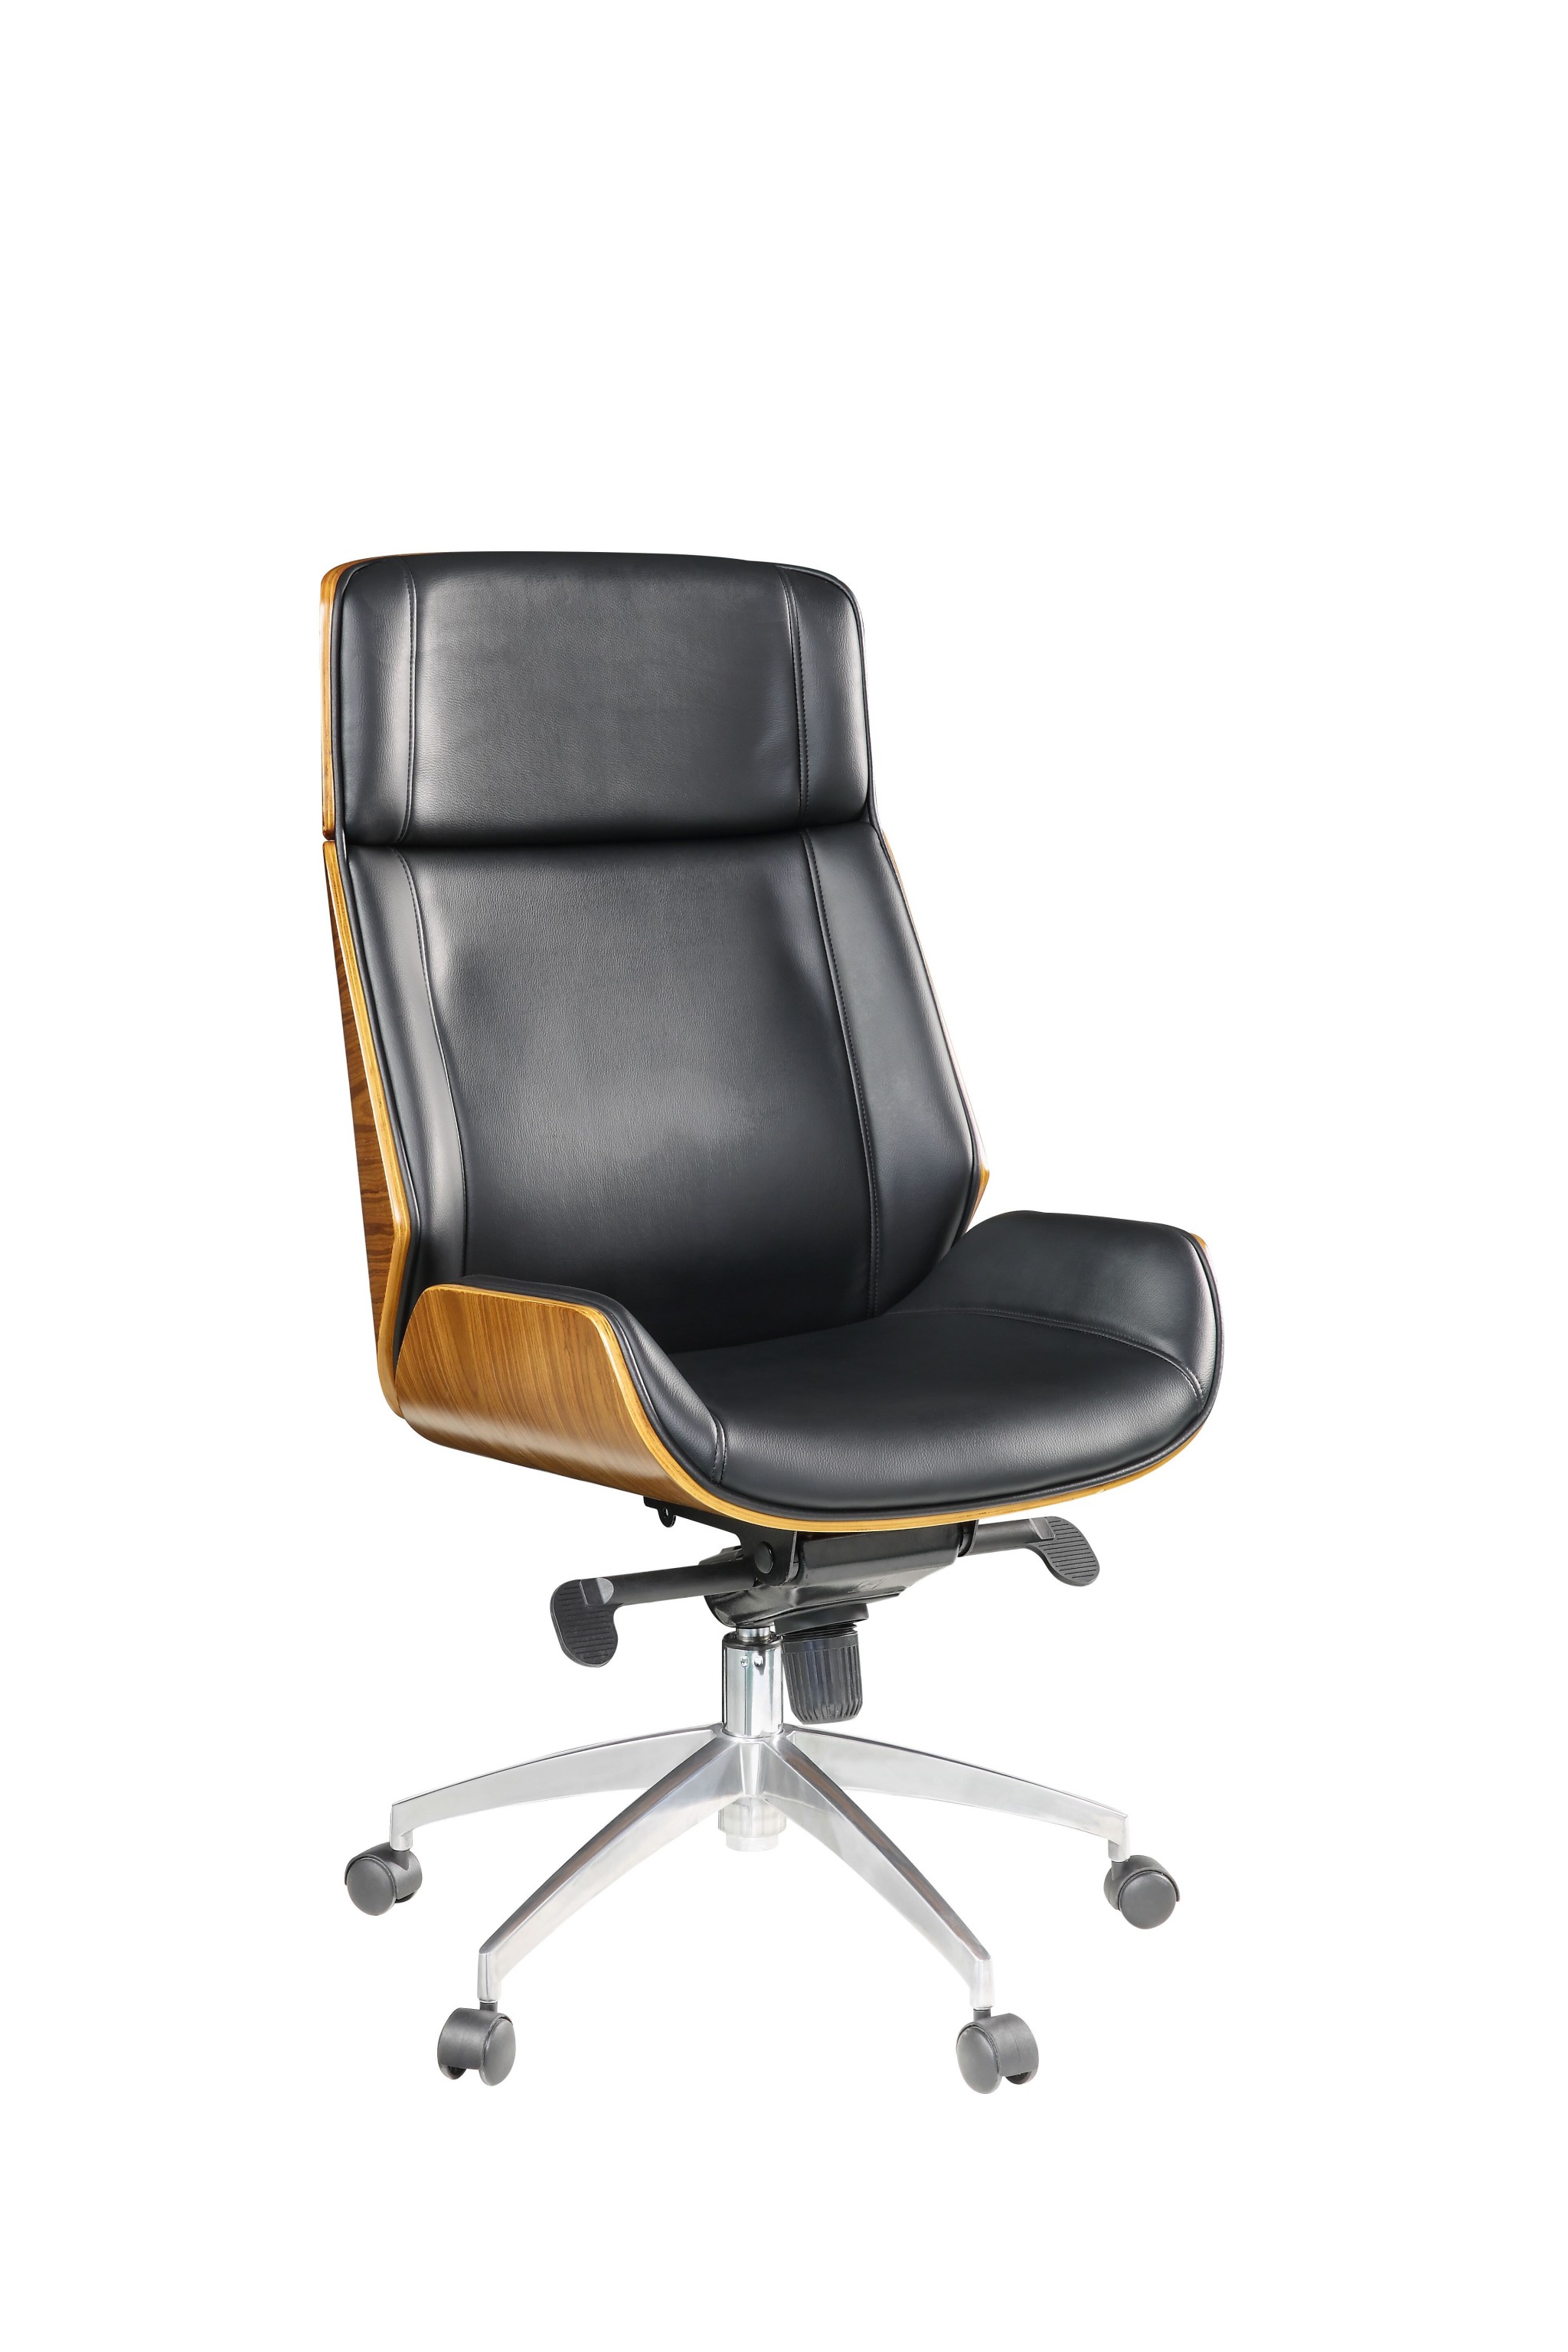 26" X 23" X 49" Black Bonded Leather and Bentwood Frame Executive Office Chair with Solid Chrome Base and Caster Wheels